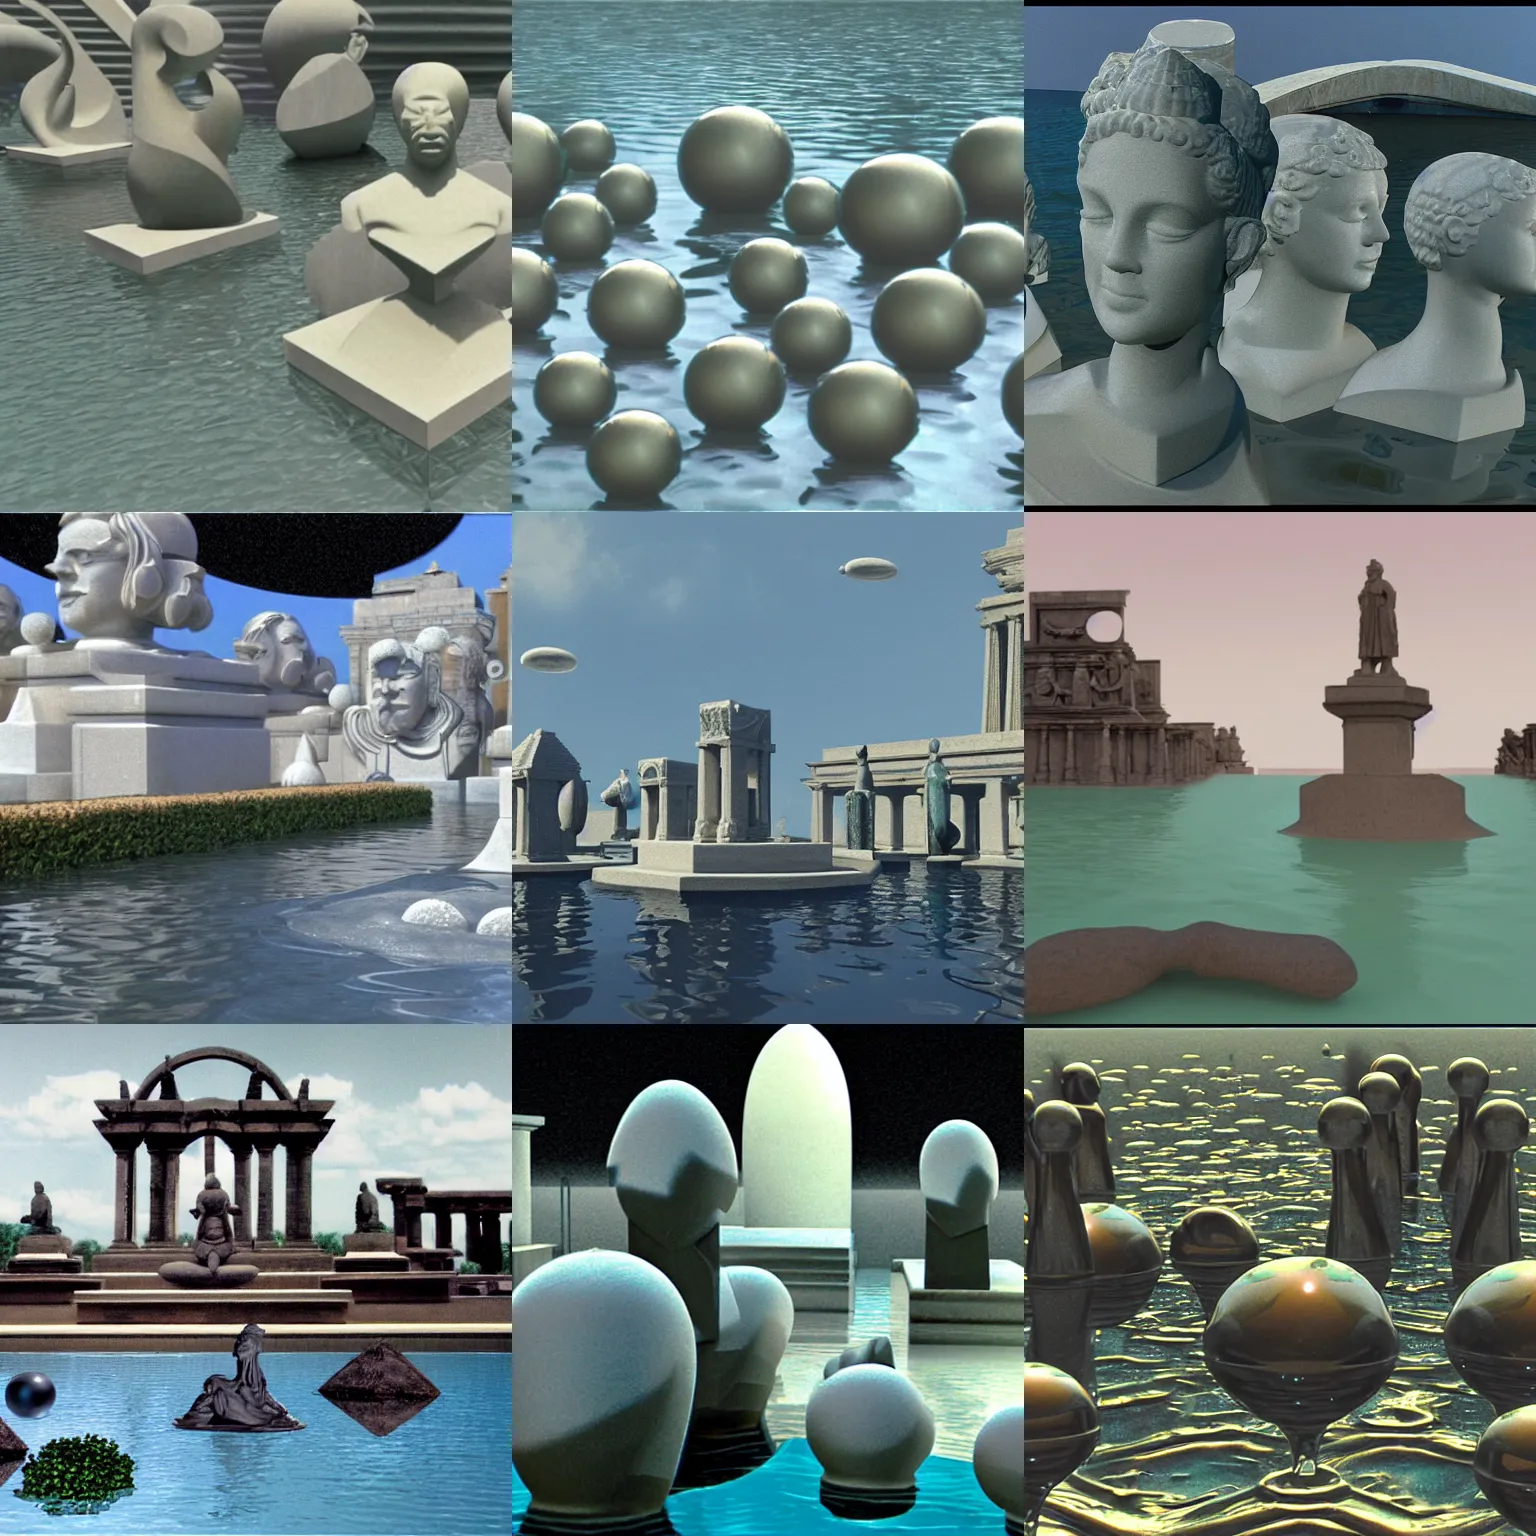 Prompt: still from a 1 9 8 3 3 d computer animation, constructive solid geometry, floating spheres and shapes, statues, faces, water, glass, marble, chrome, stone, dolphins, temples, clouds